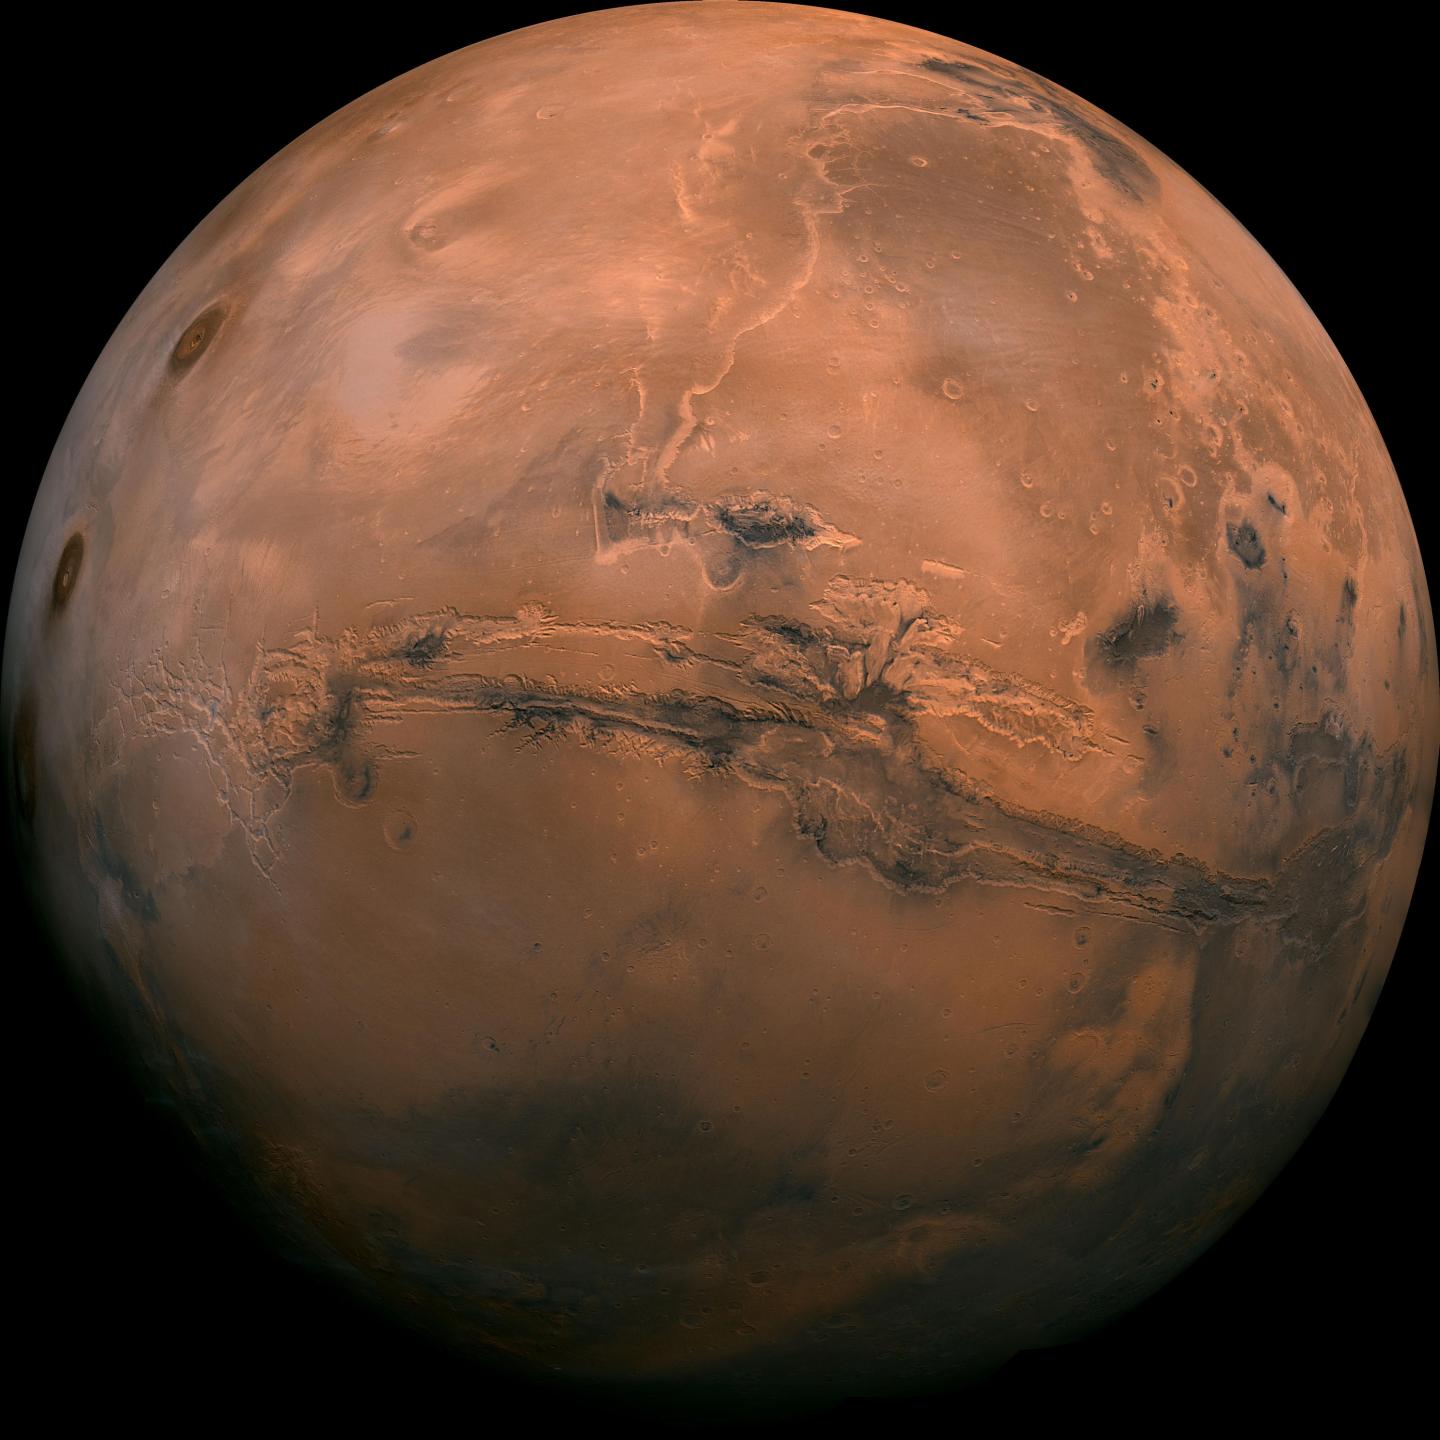 The red planet, Mars